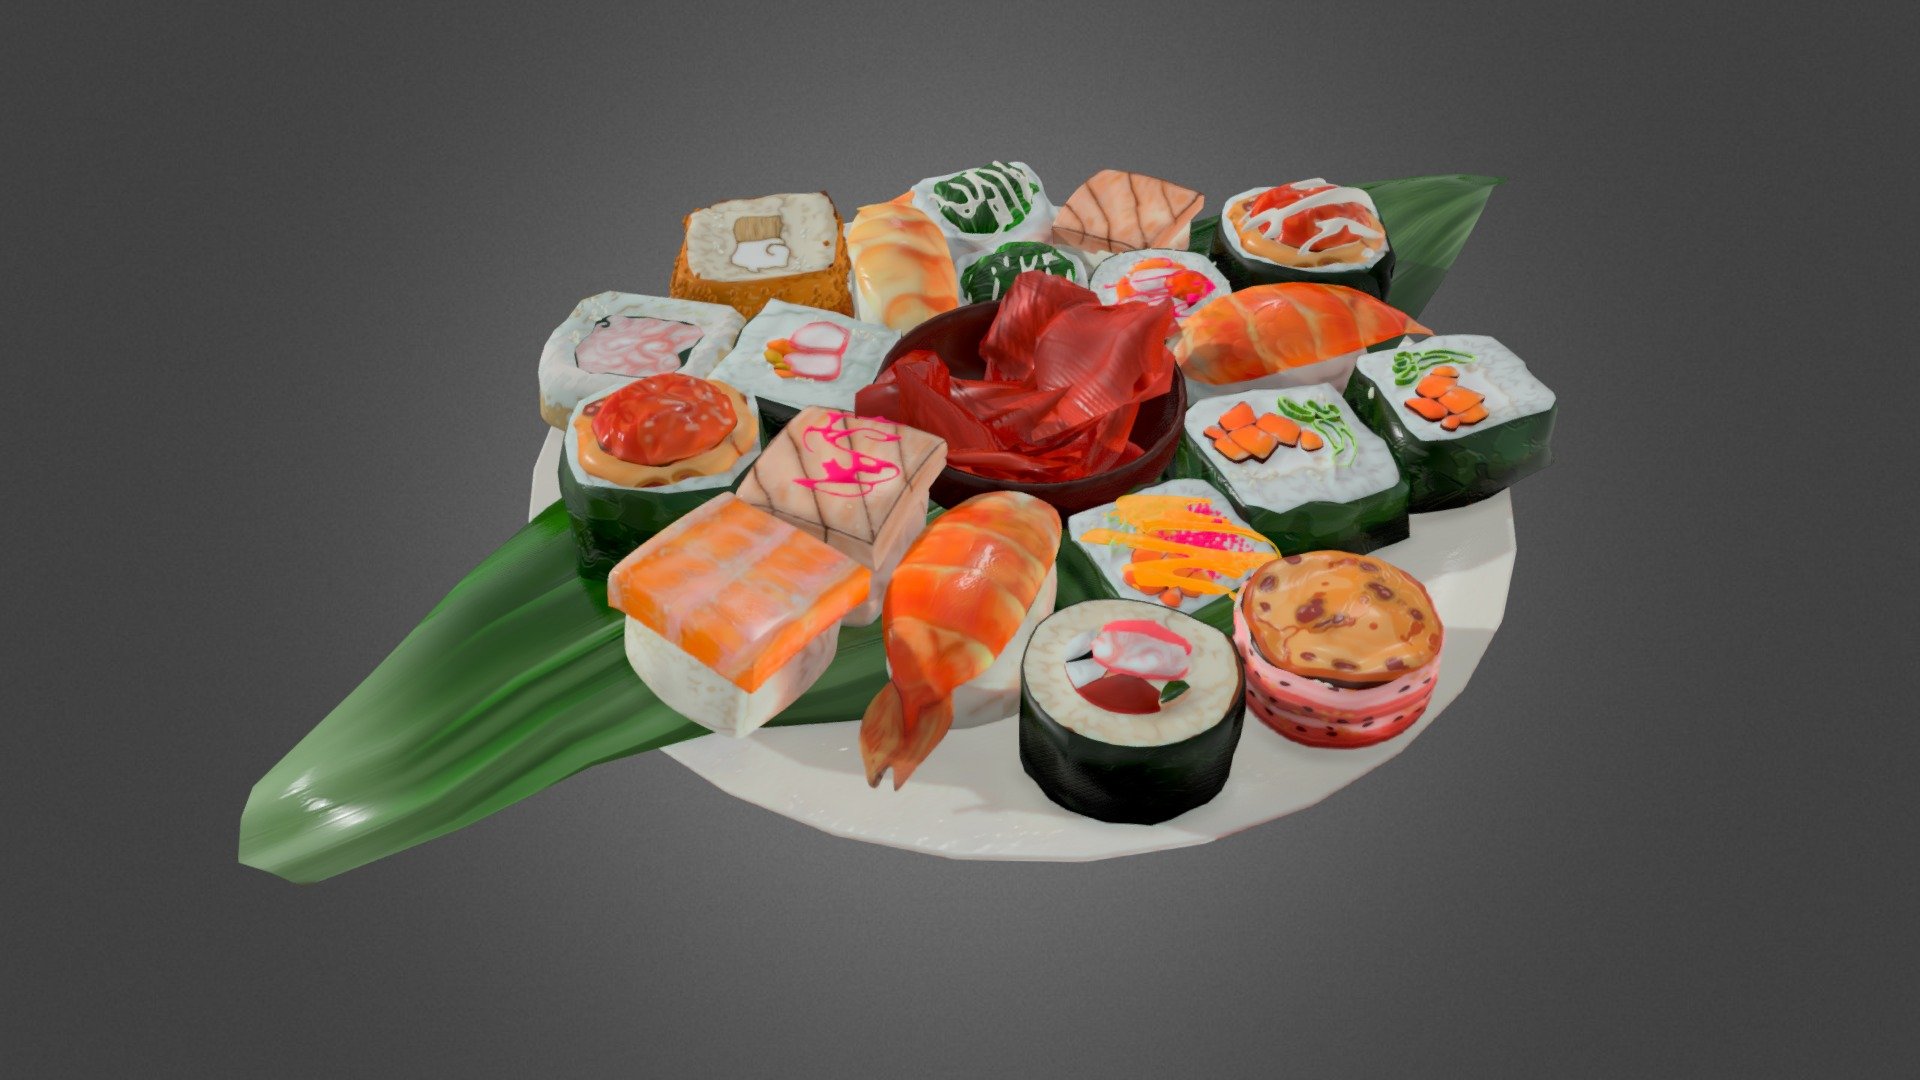 for play sushi set

made in blender
hand painted - sushi play set - 3D model by Das_Xenon 3d model